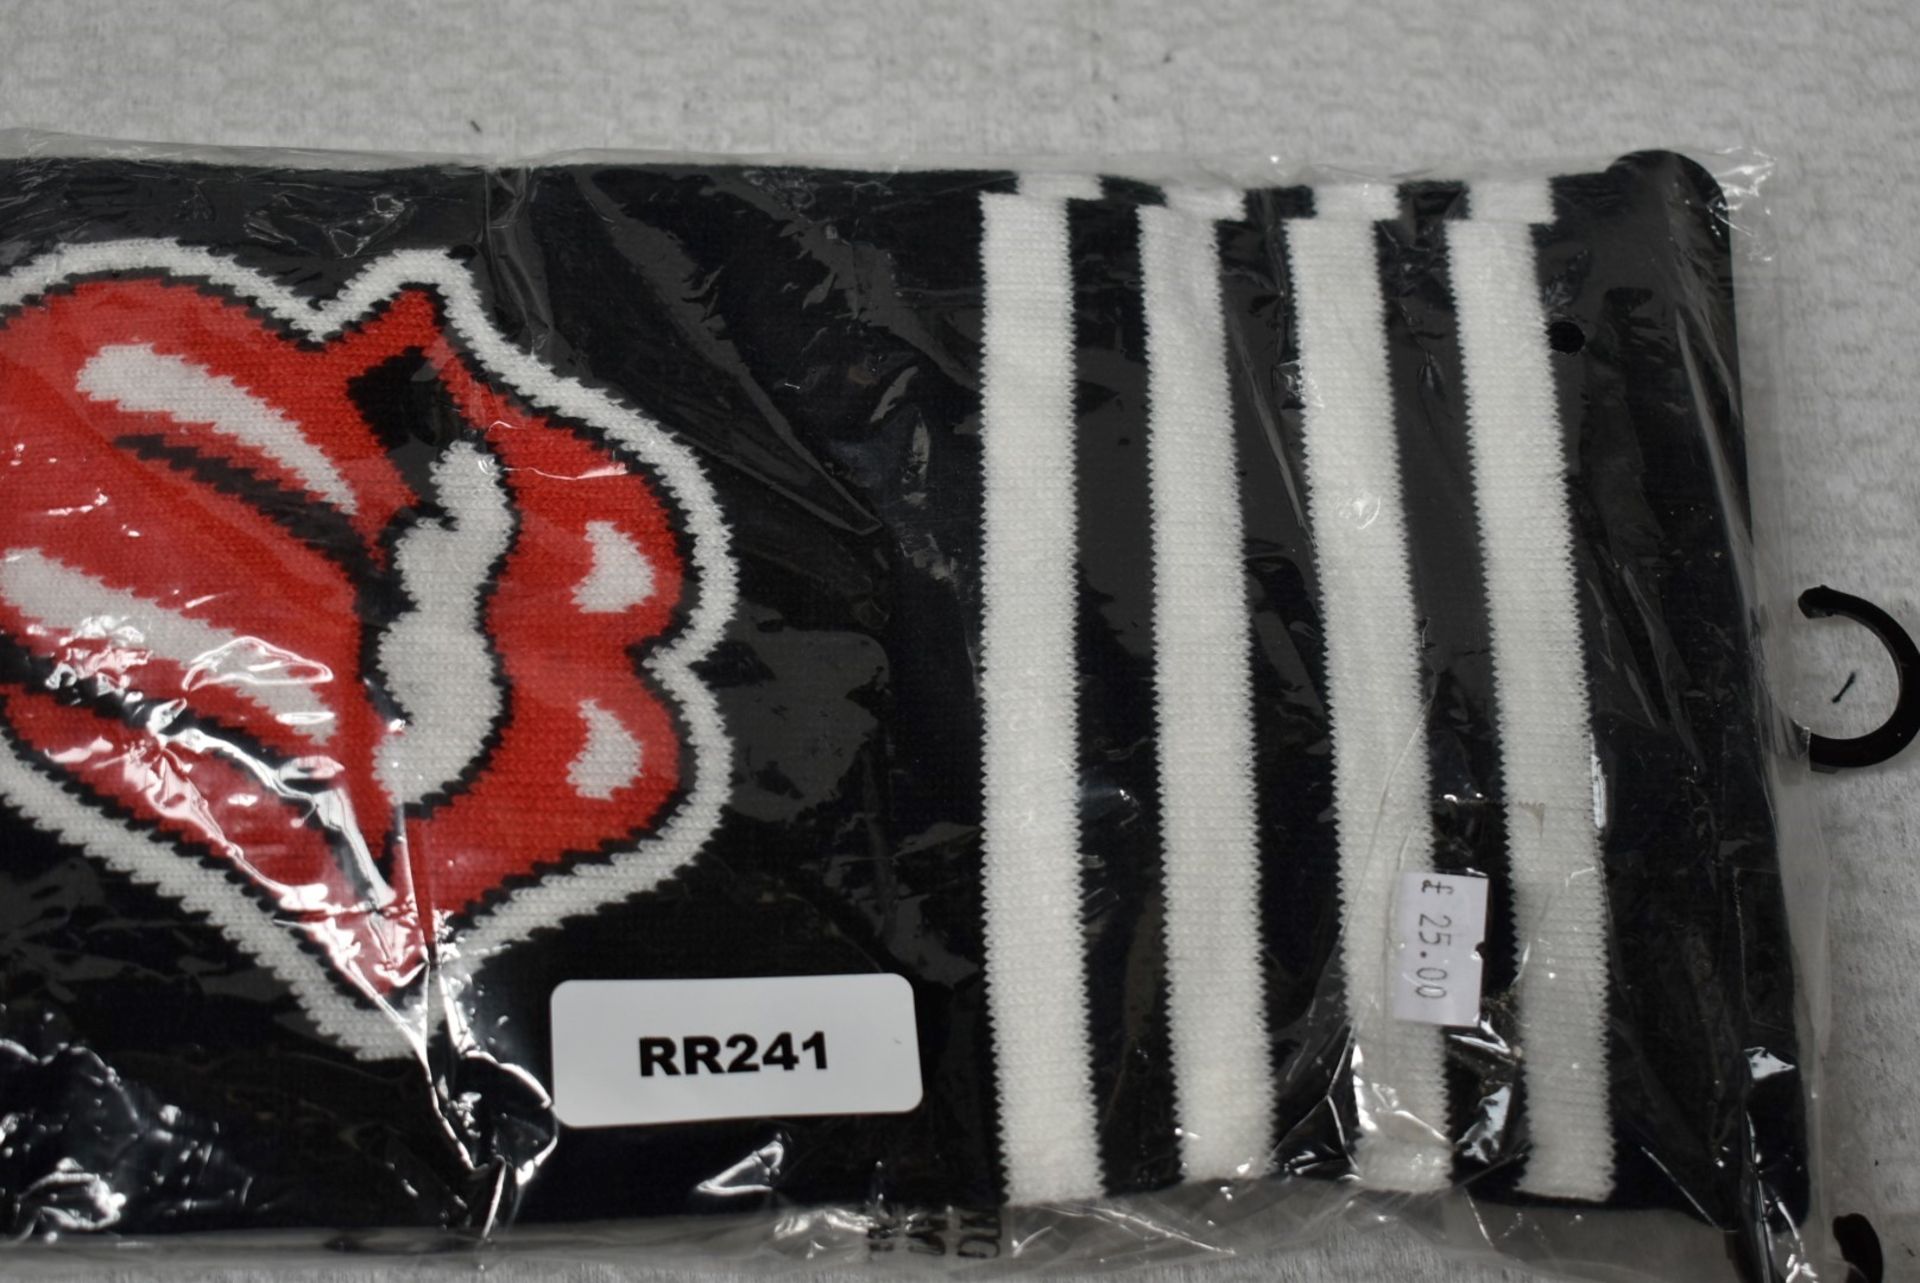 1 x Rolling Stones Scarf - Classic Tongue and Logo Design - Officially Licensed Merchandise - New & - Image 4 of 6